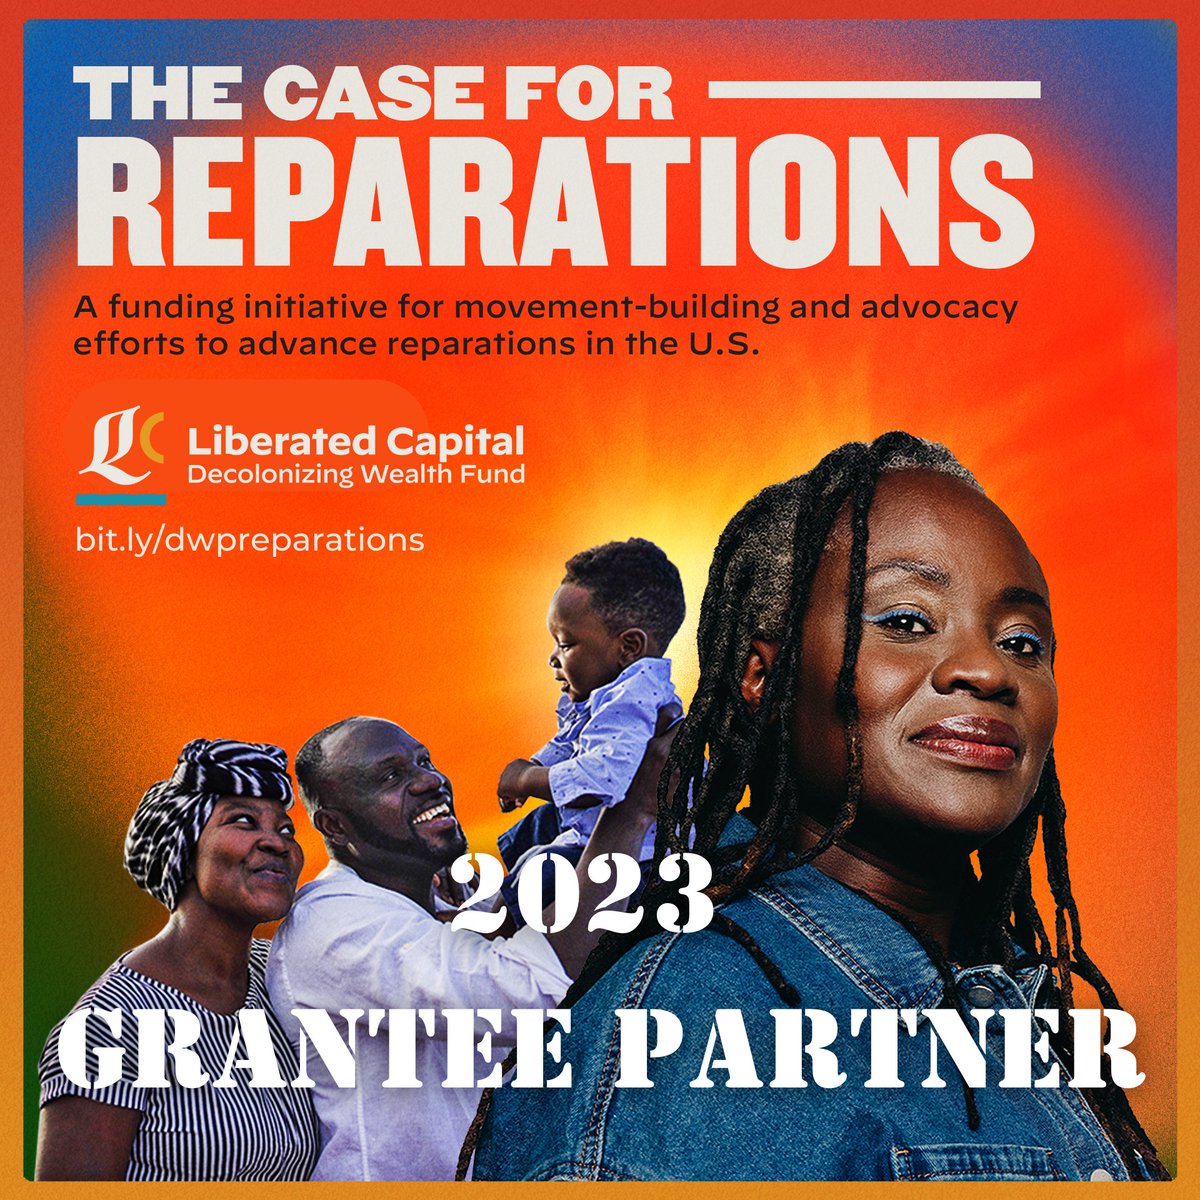 EJS is thrilled and humbled to be named a #LiberatedCapital #Case4Reparations grantee partner! The fund is the first to support local, regional, and national movement-building and advocacy efforts to advance #reparations in the US. bit.ly/45Pfrjy #DecolonizingWealth